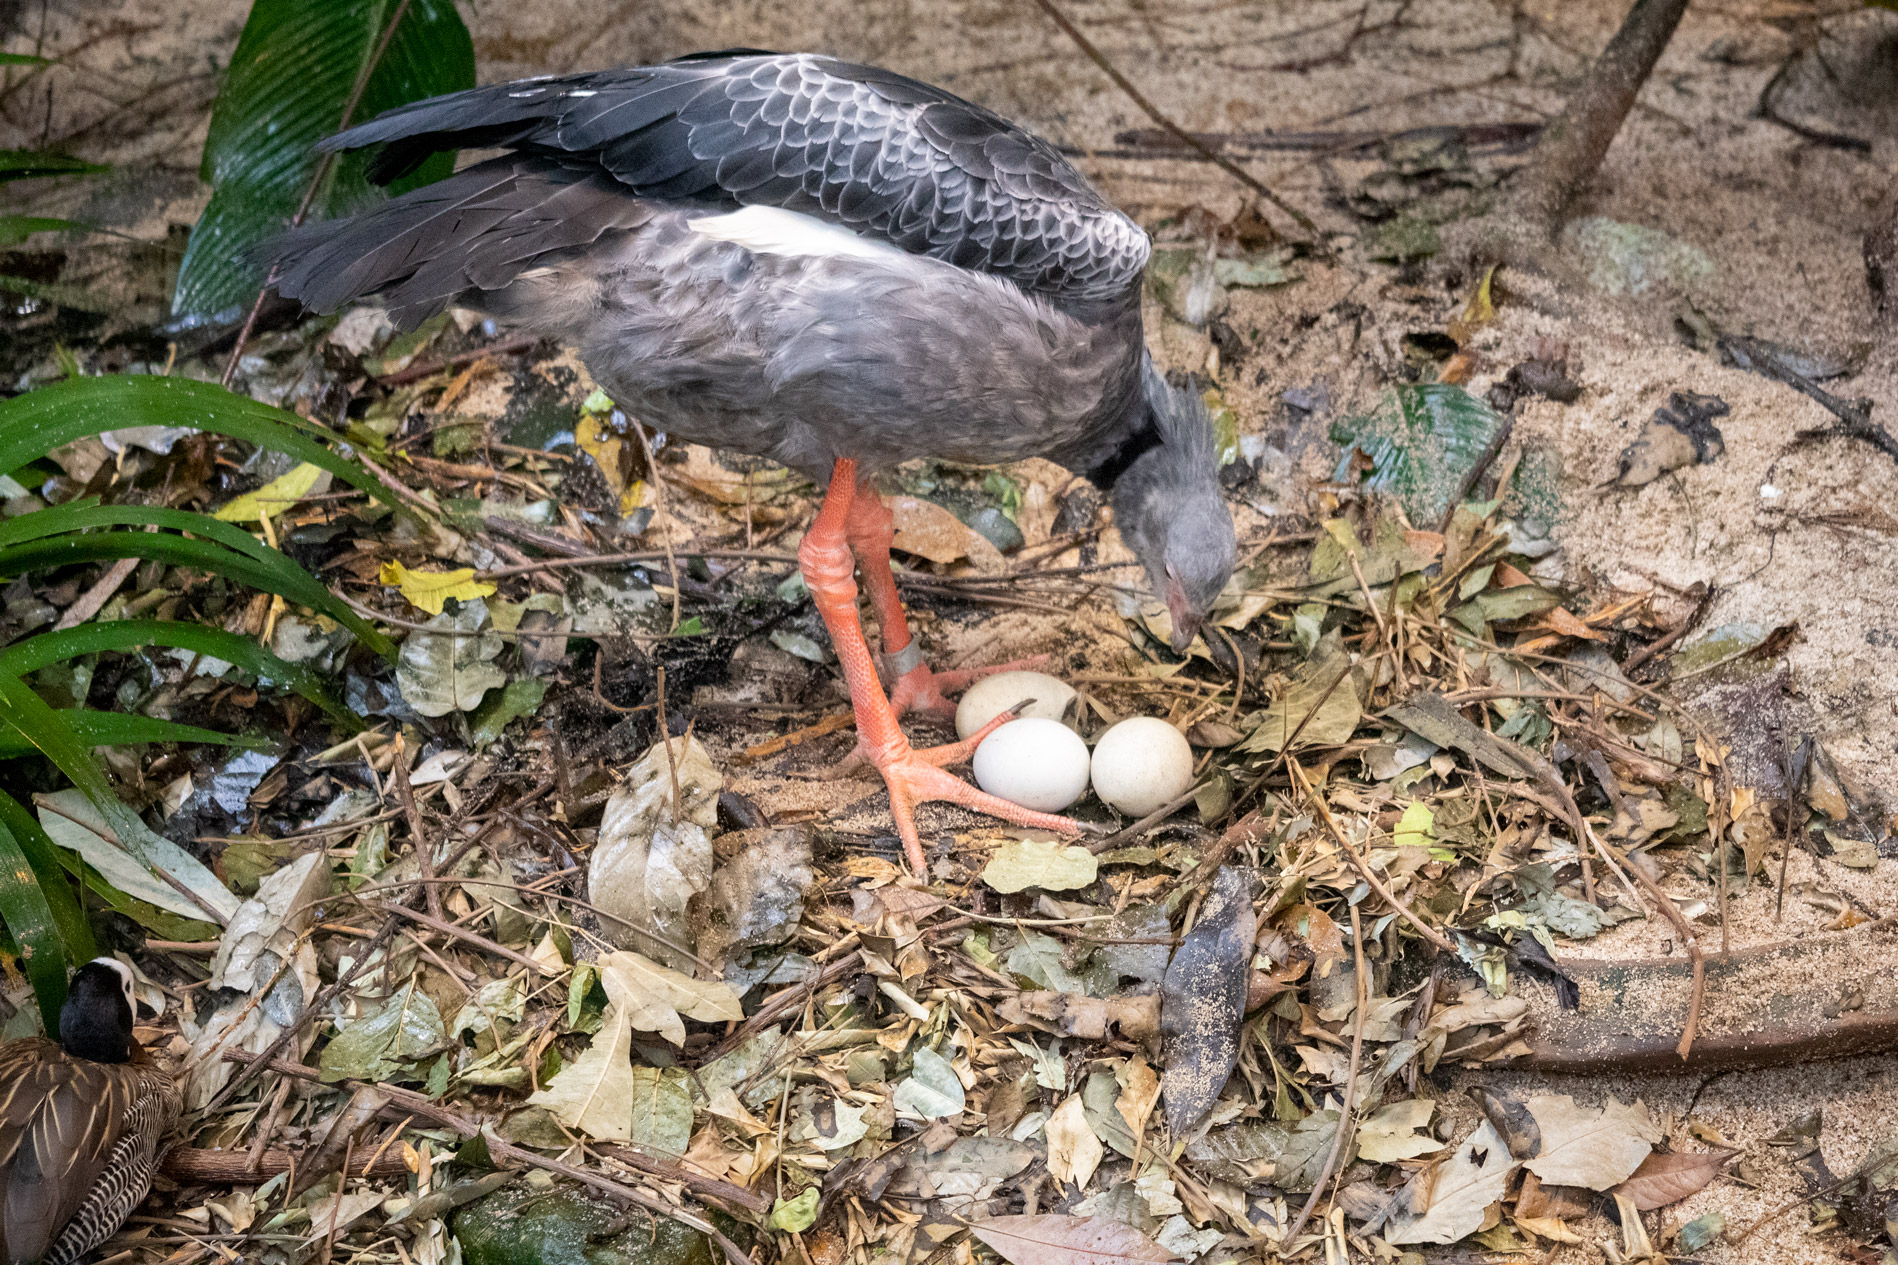 Large grey bird with orange legs standing over 3 eggs on a forest floor